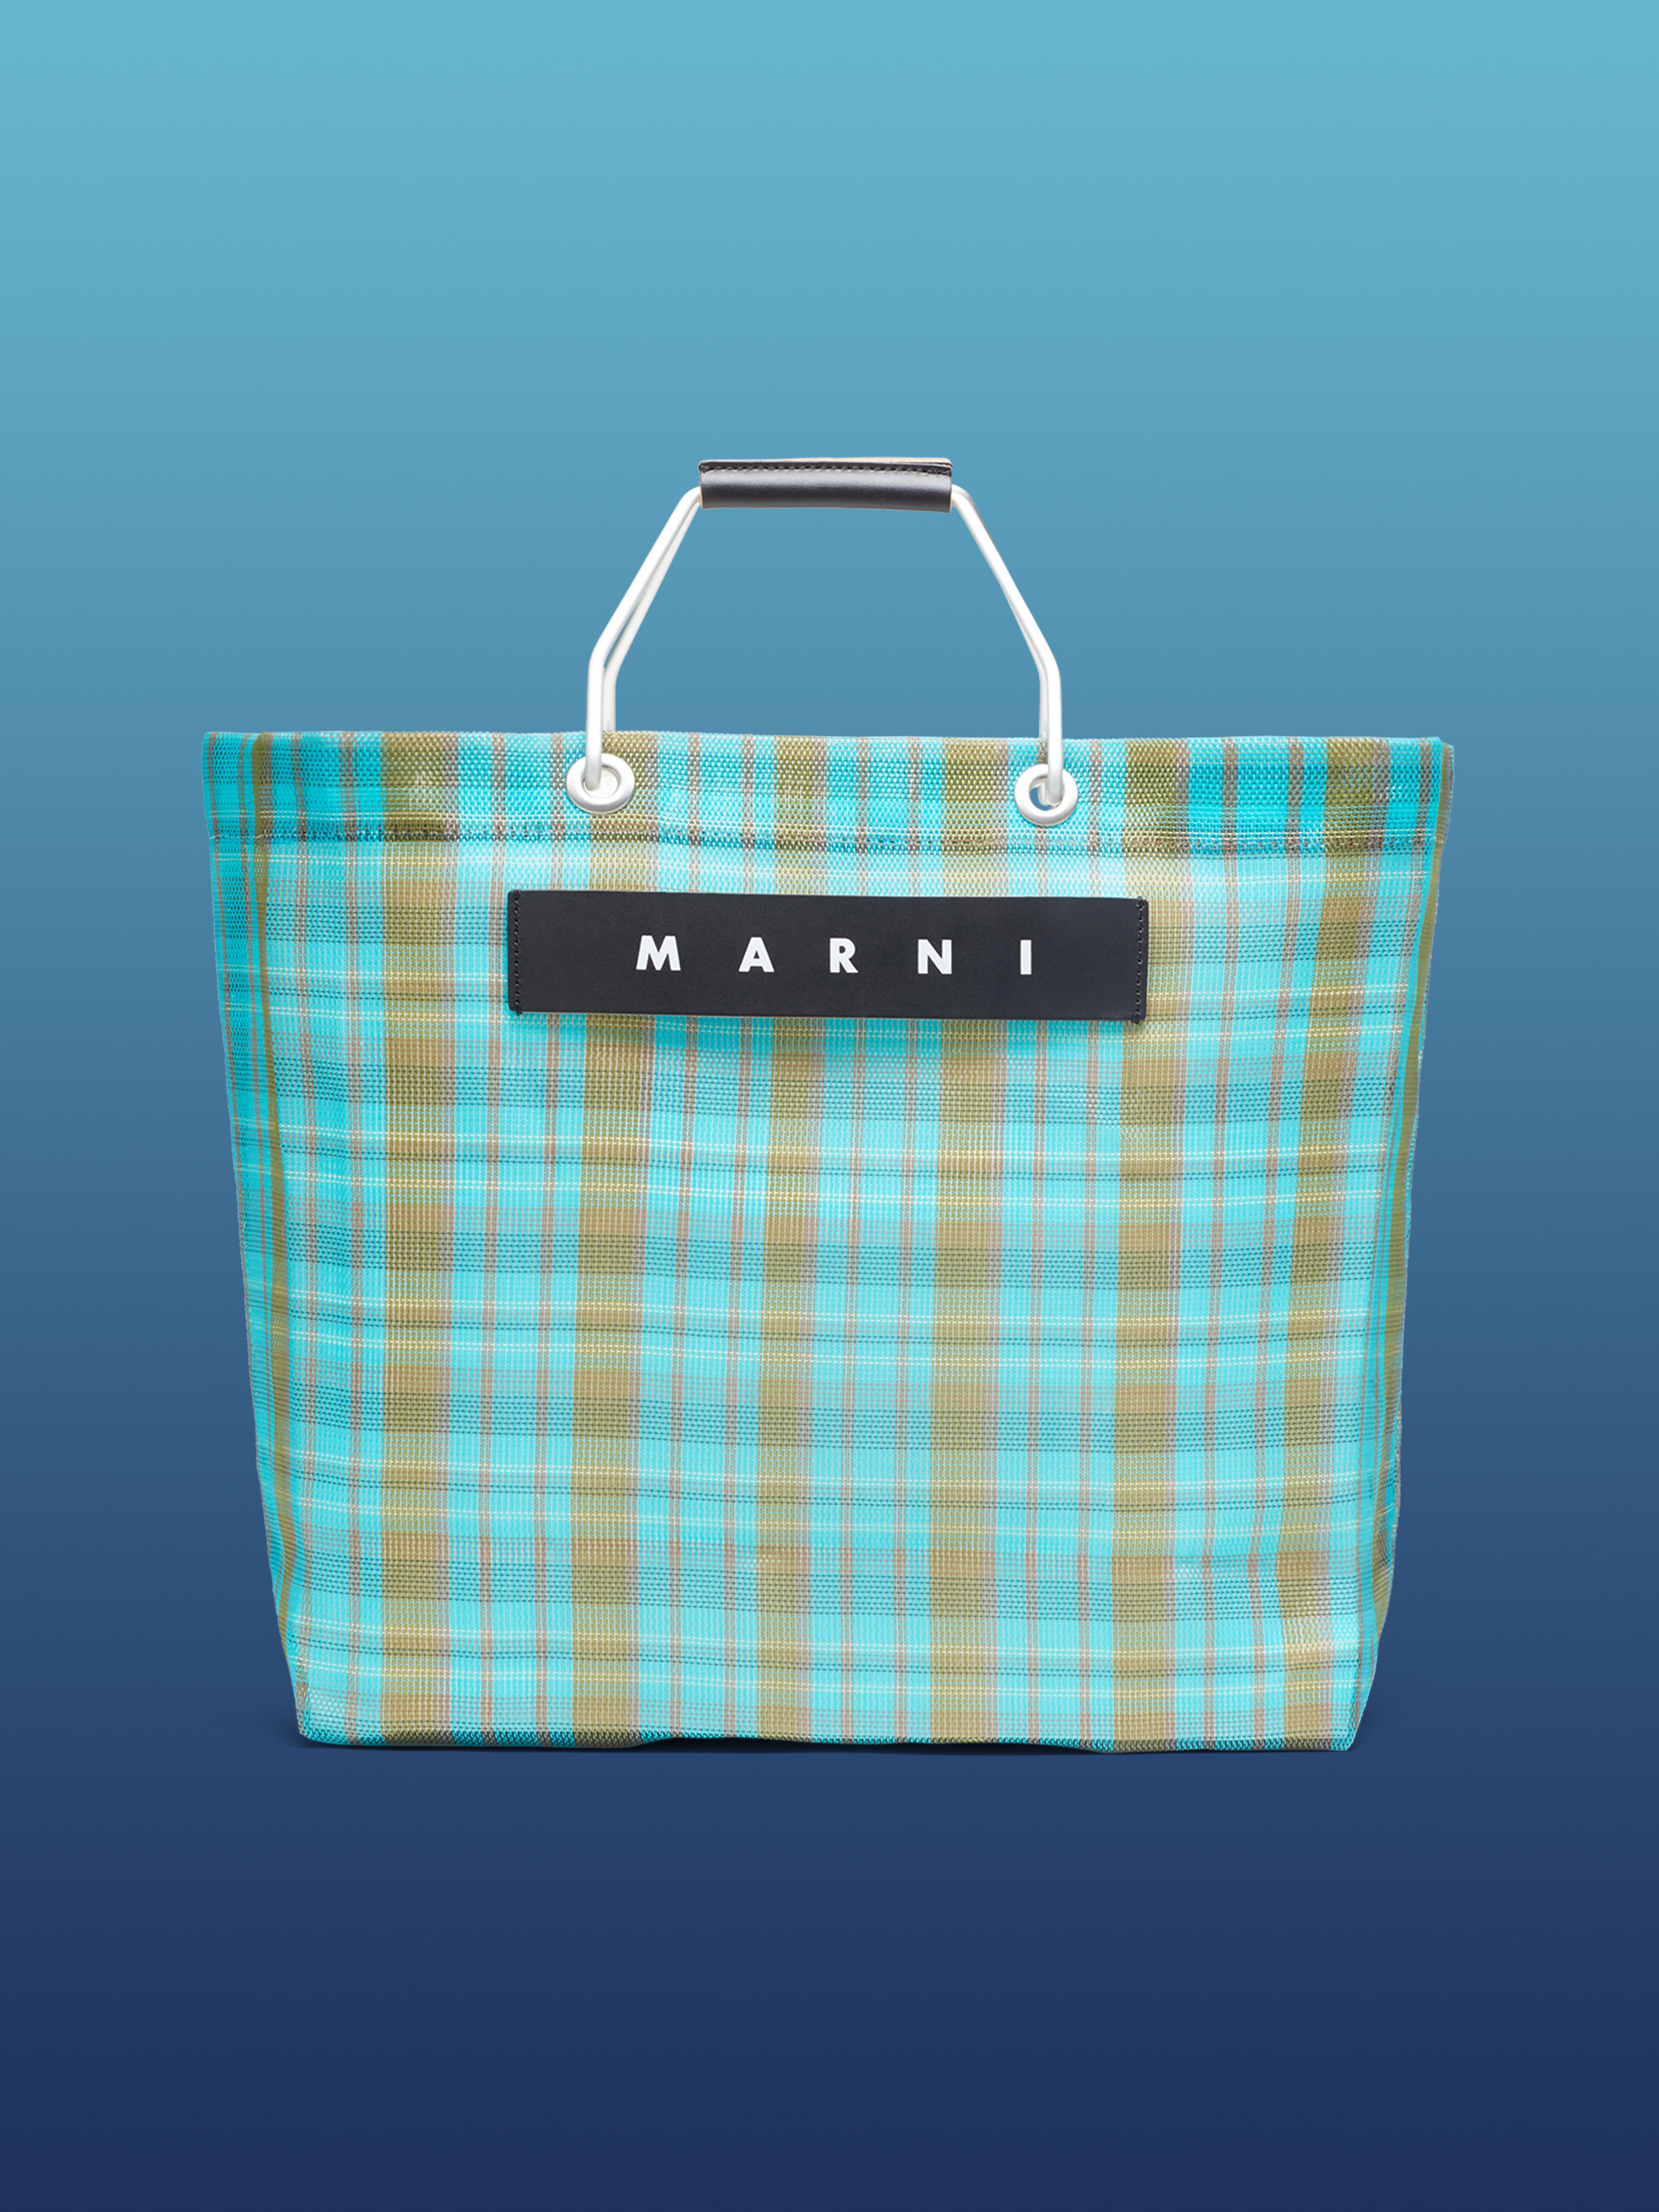 MARNI MARKET bag in pale blue and green - Shopping Bags - Image 1